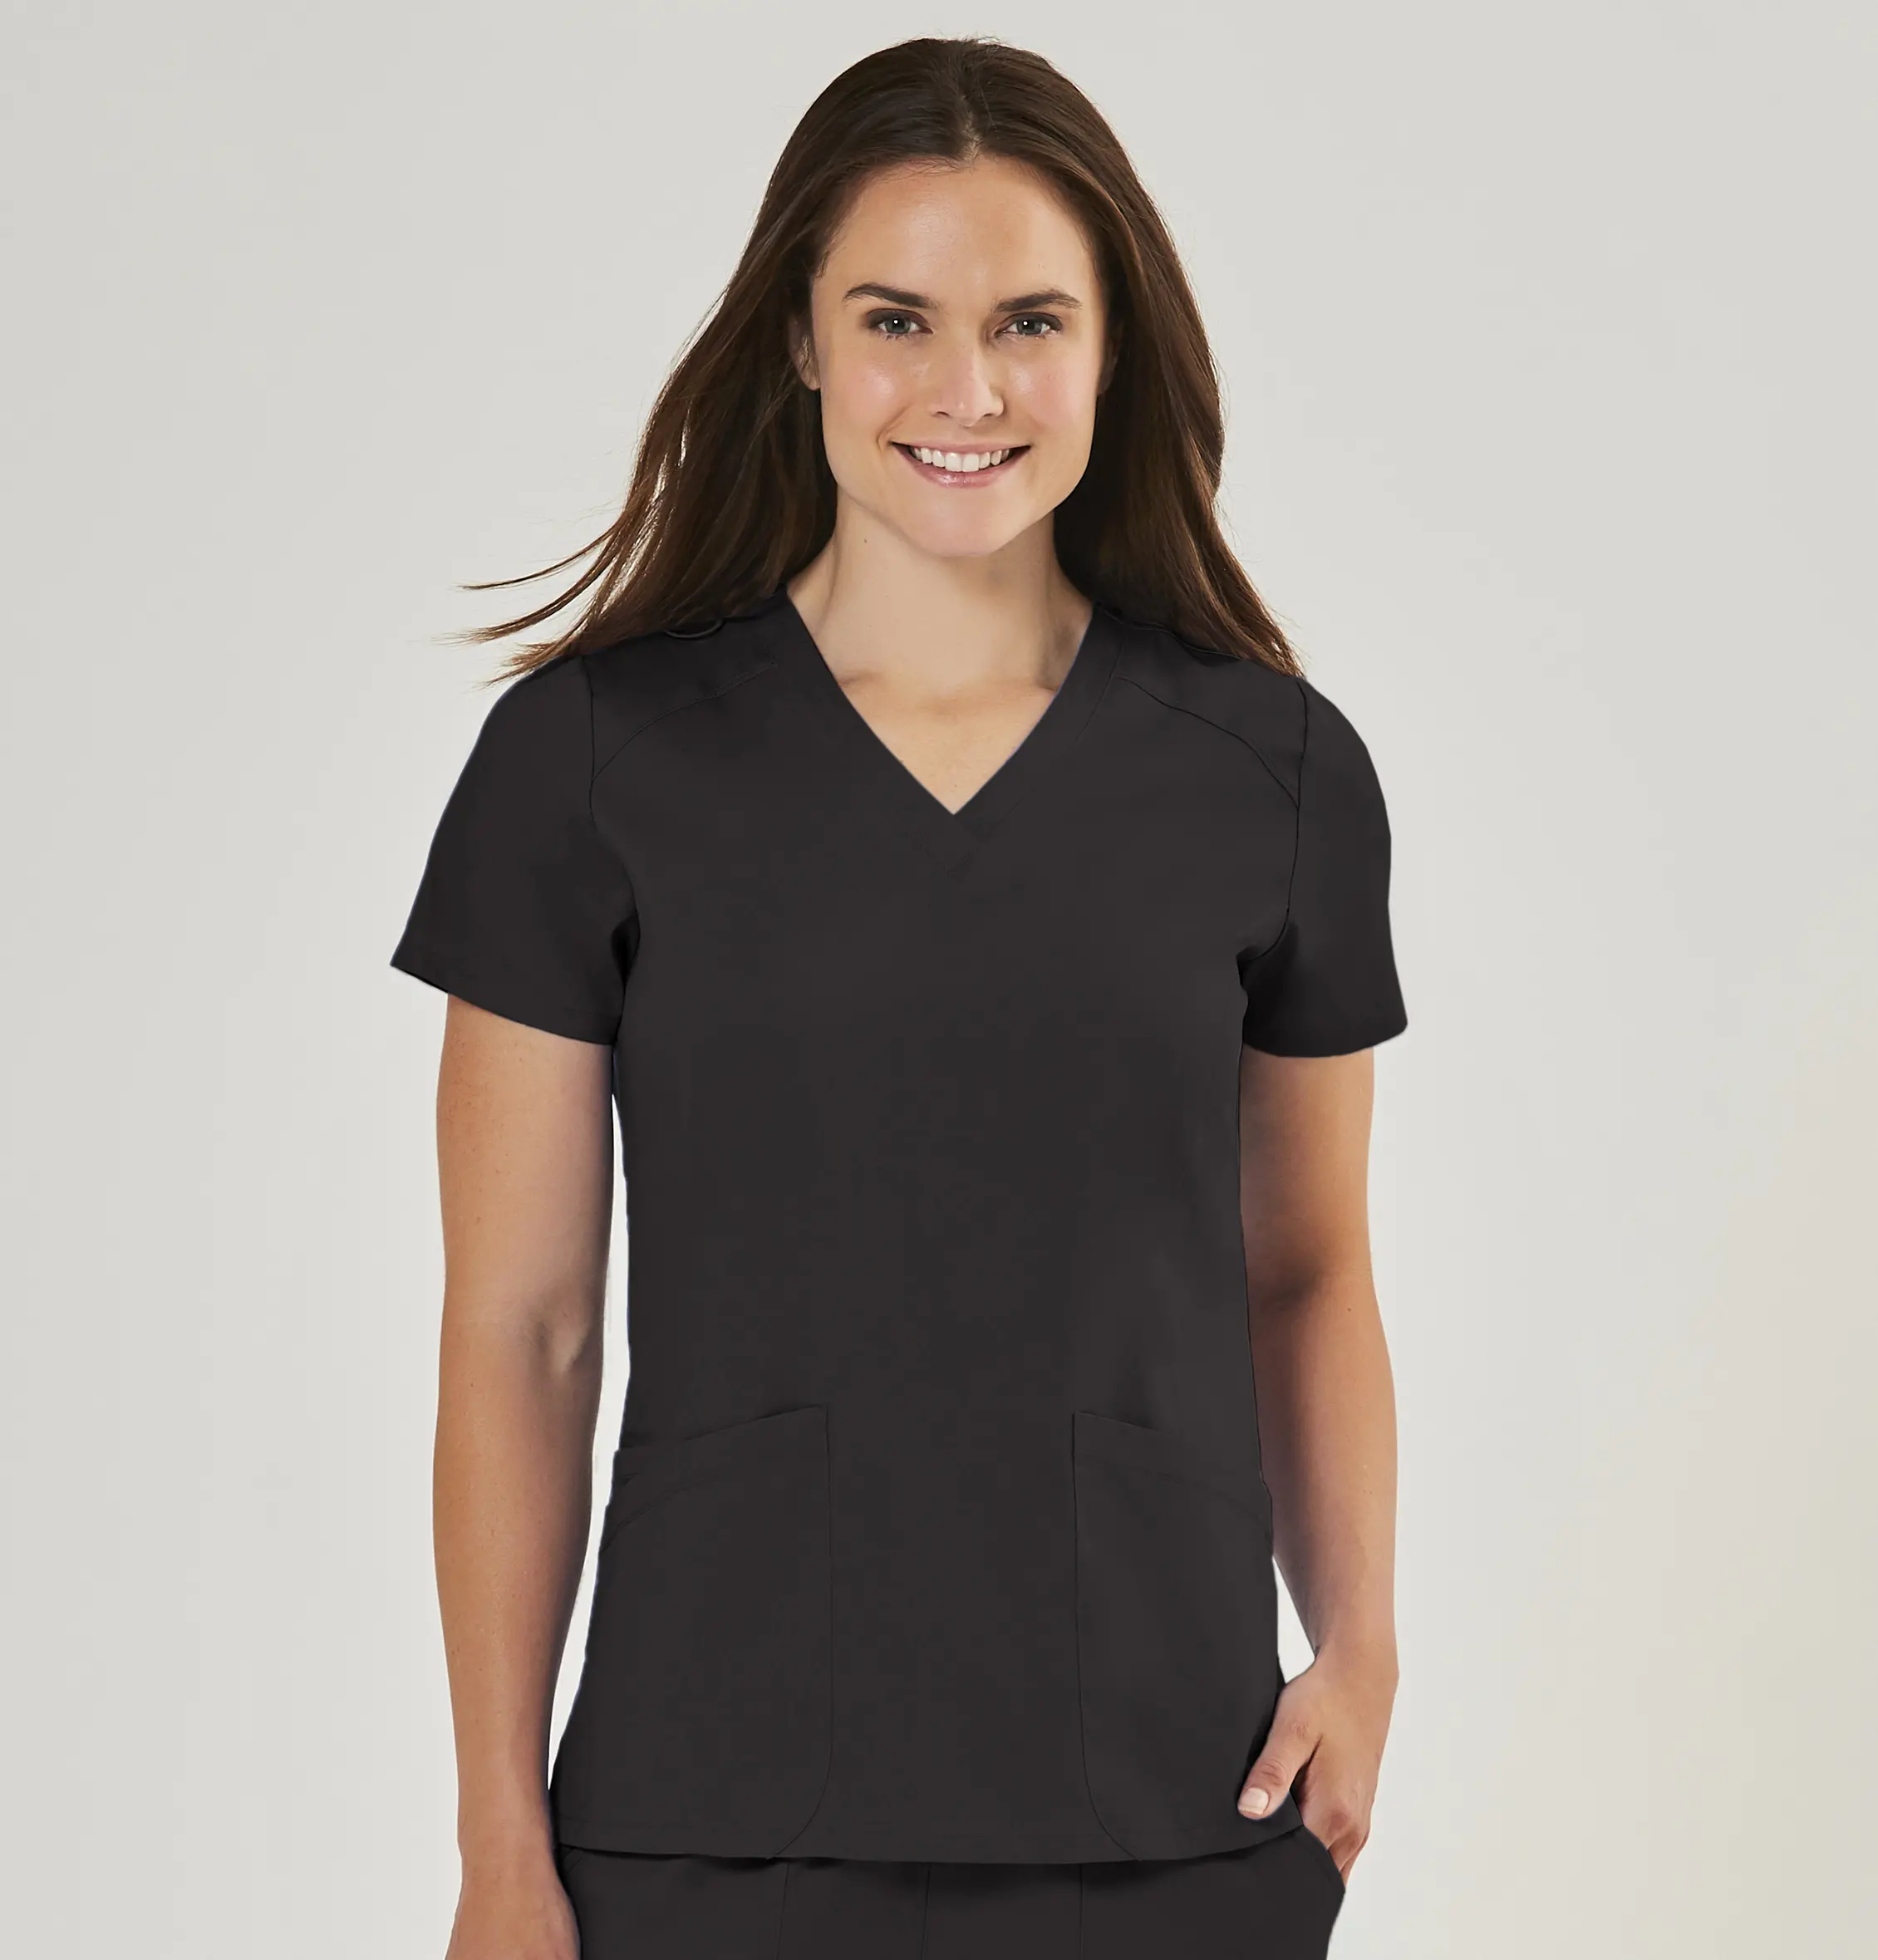 IRG Edge 2811 Zip Jacket with Stretchy Sides – Coulee Scrubs